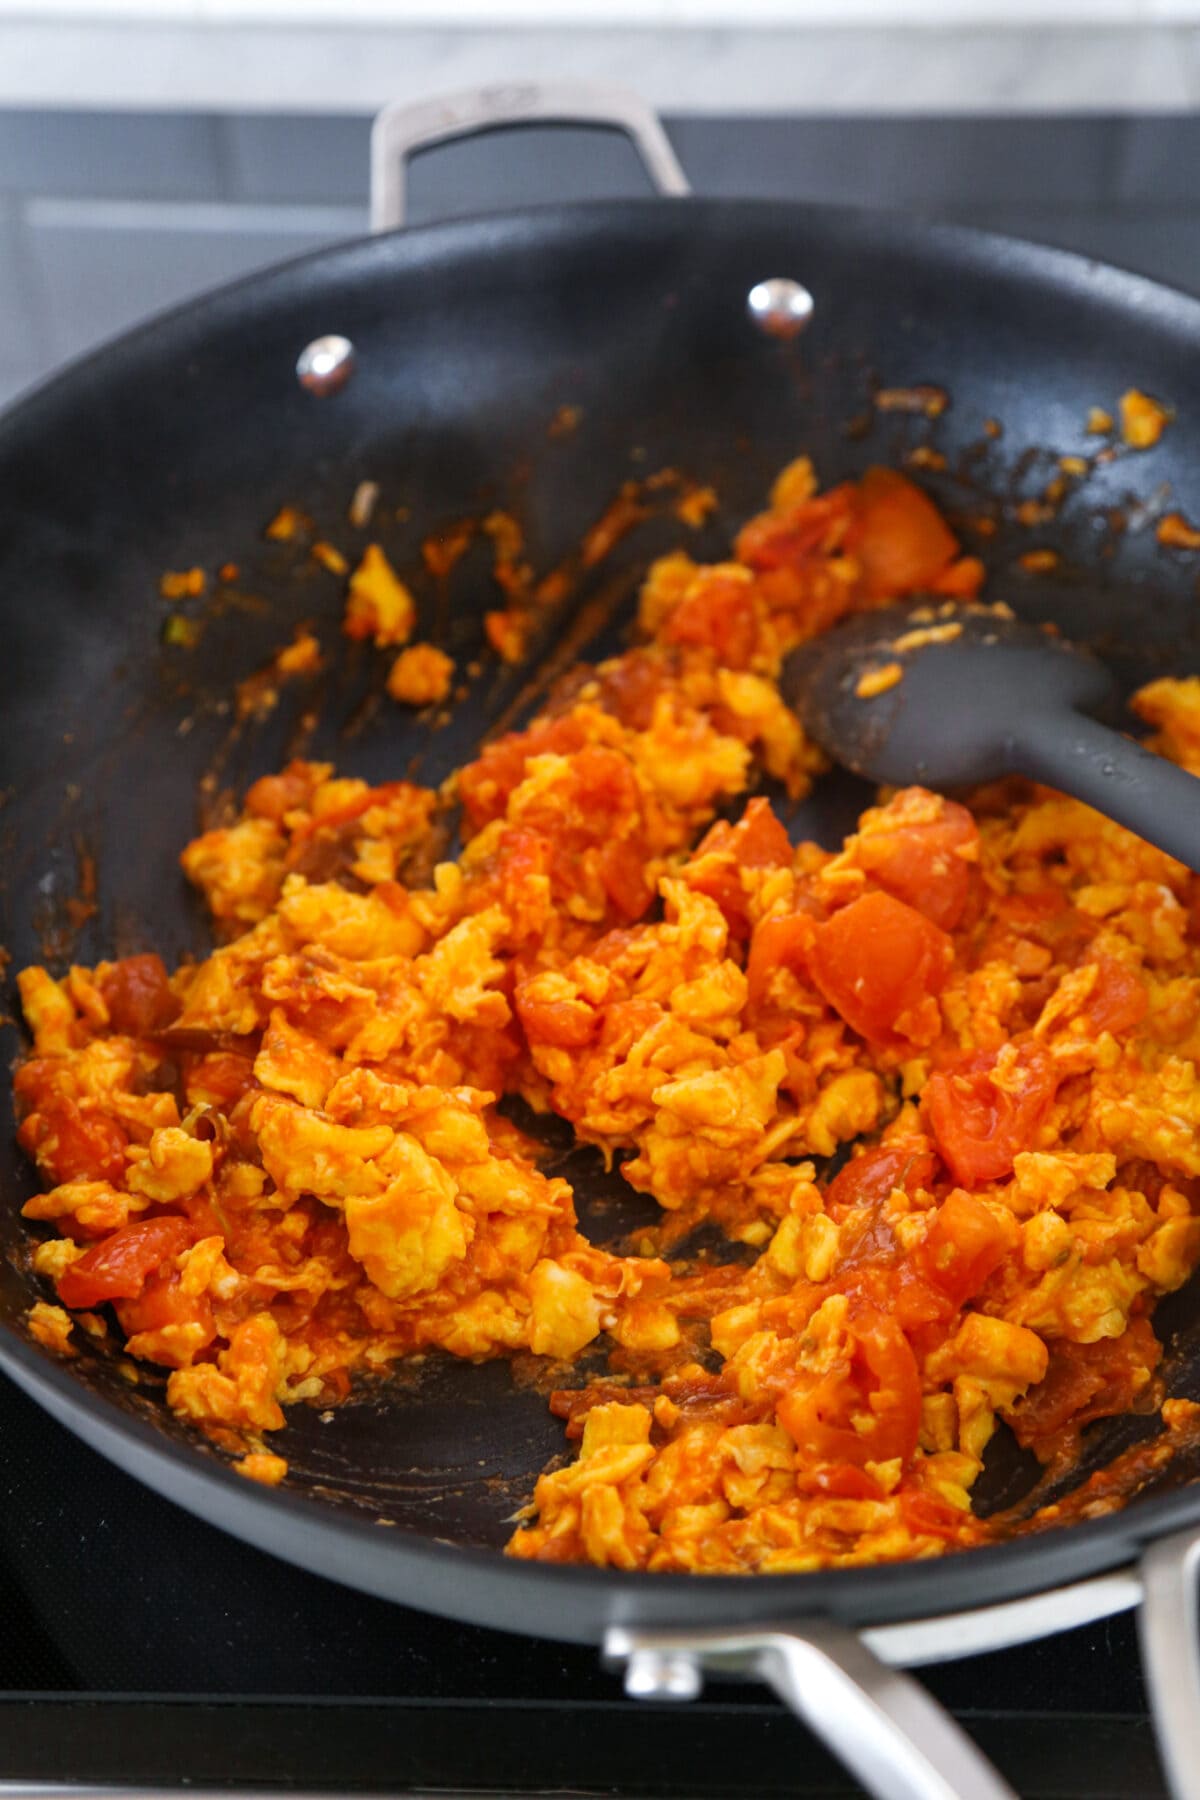 chopped tomato and scrambled egg in skillet